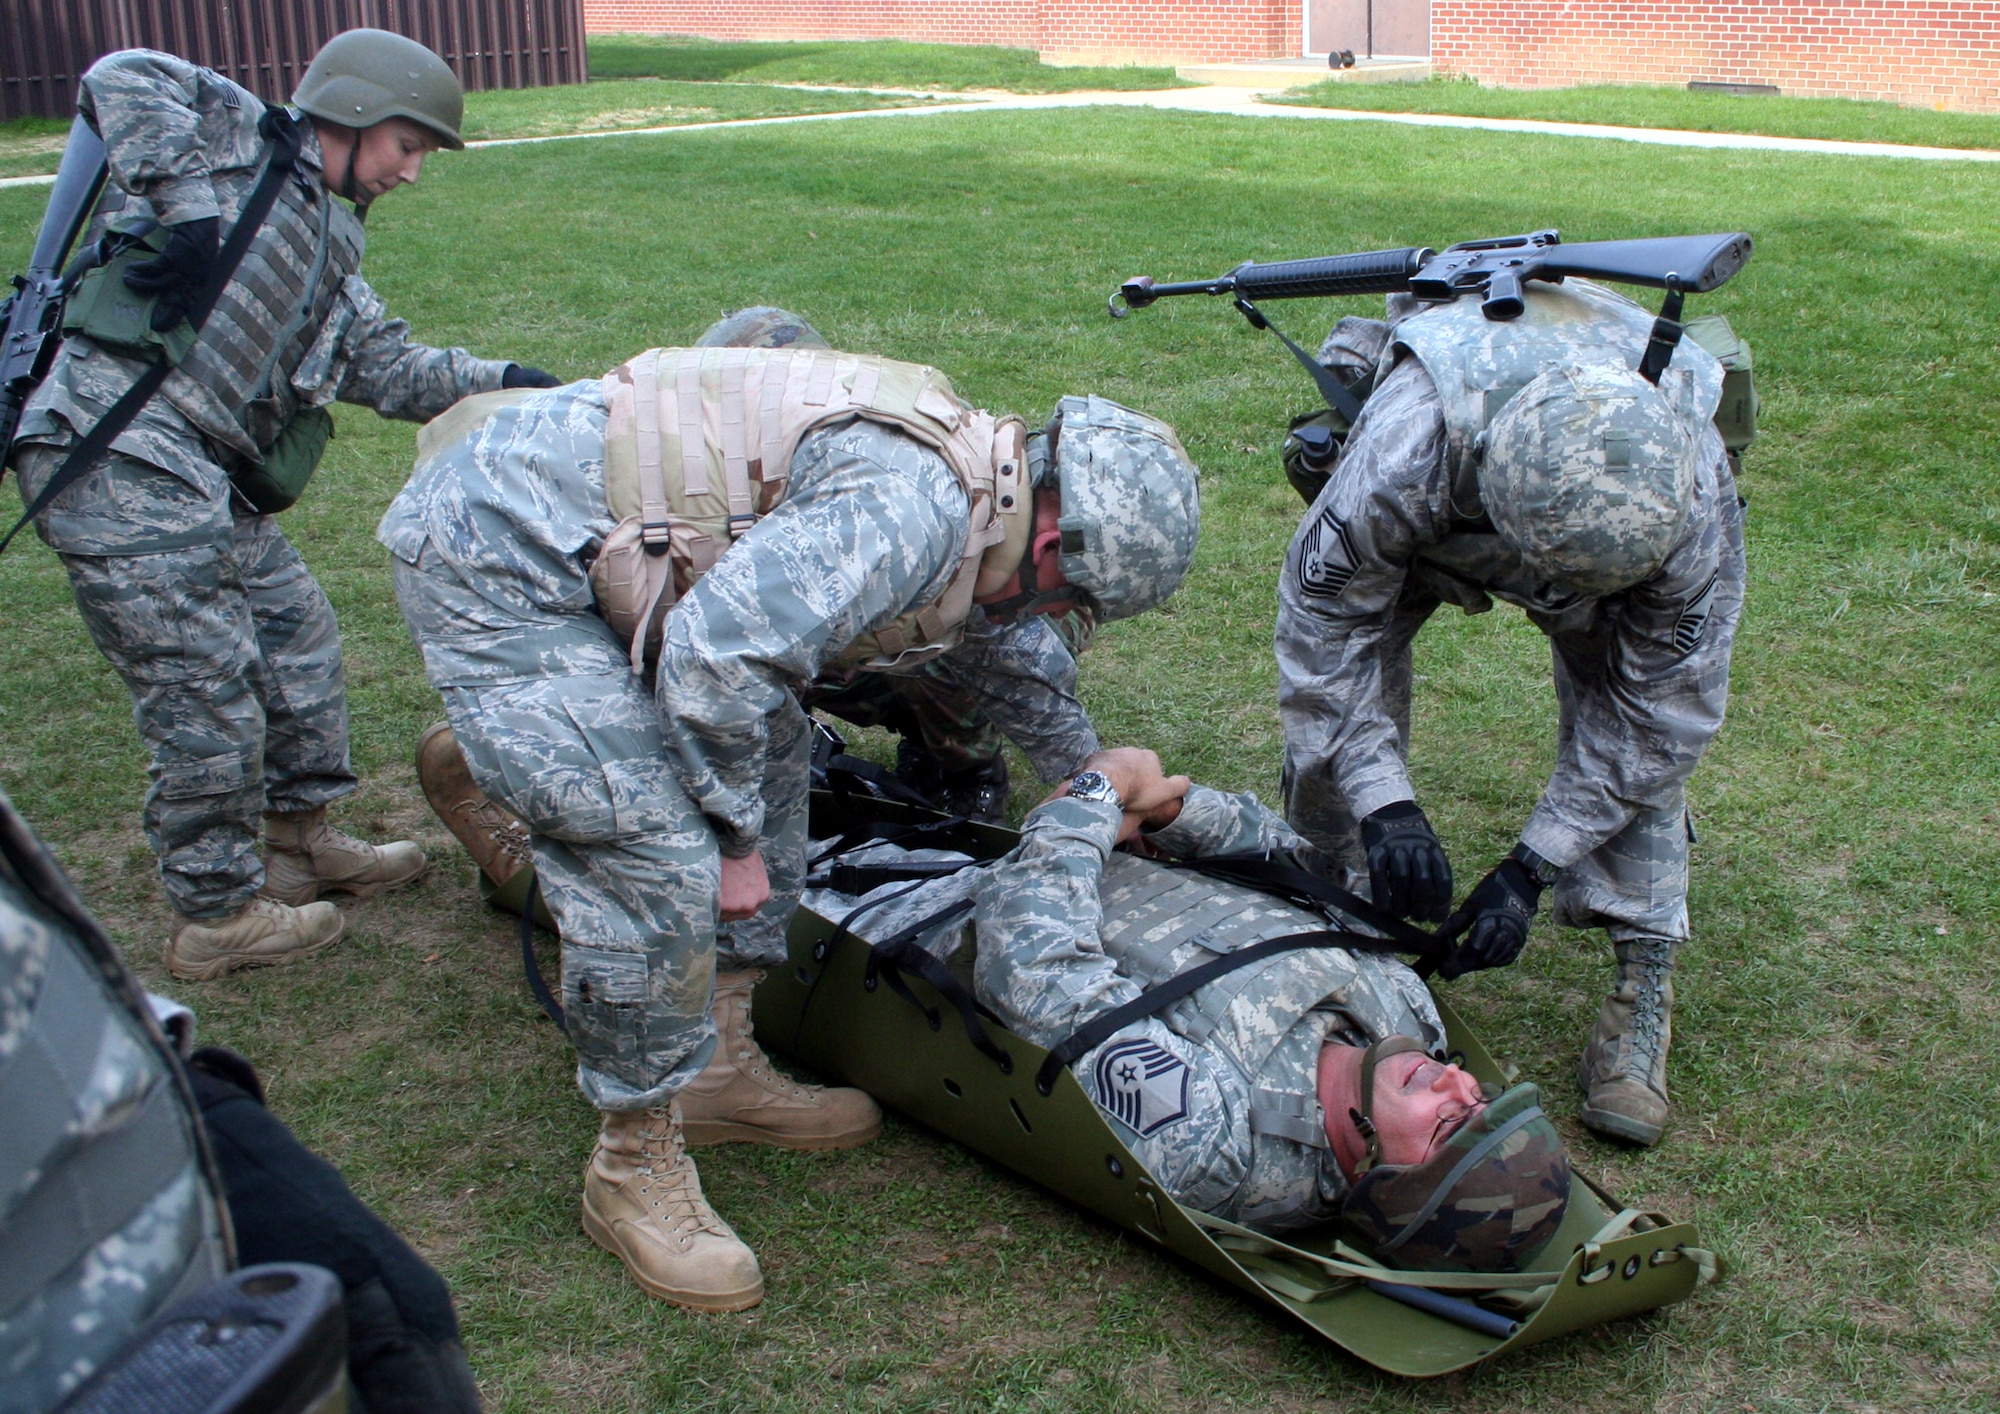 Students in the Combat Airman Skills Training Course participate in a training session of the Care Under Fire (combat first aid) class on Nov. 9, 2009, at the U.S. Air Force Expeditionary Center at Joint Base McGuire-Dix-Lakehurst, N.J.  The class, taught by the Expeditionary Center's 421st Combat Training Squadron, focuses on combat lifesaver skills.  The CAST course trains Airmen for upcoming deployments.  (U.S. Air Force Photo/Tech. Sgt. Scott T. Sturkol)